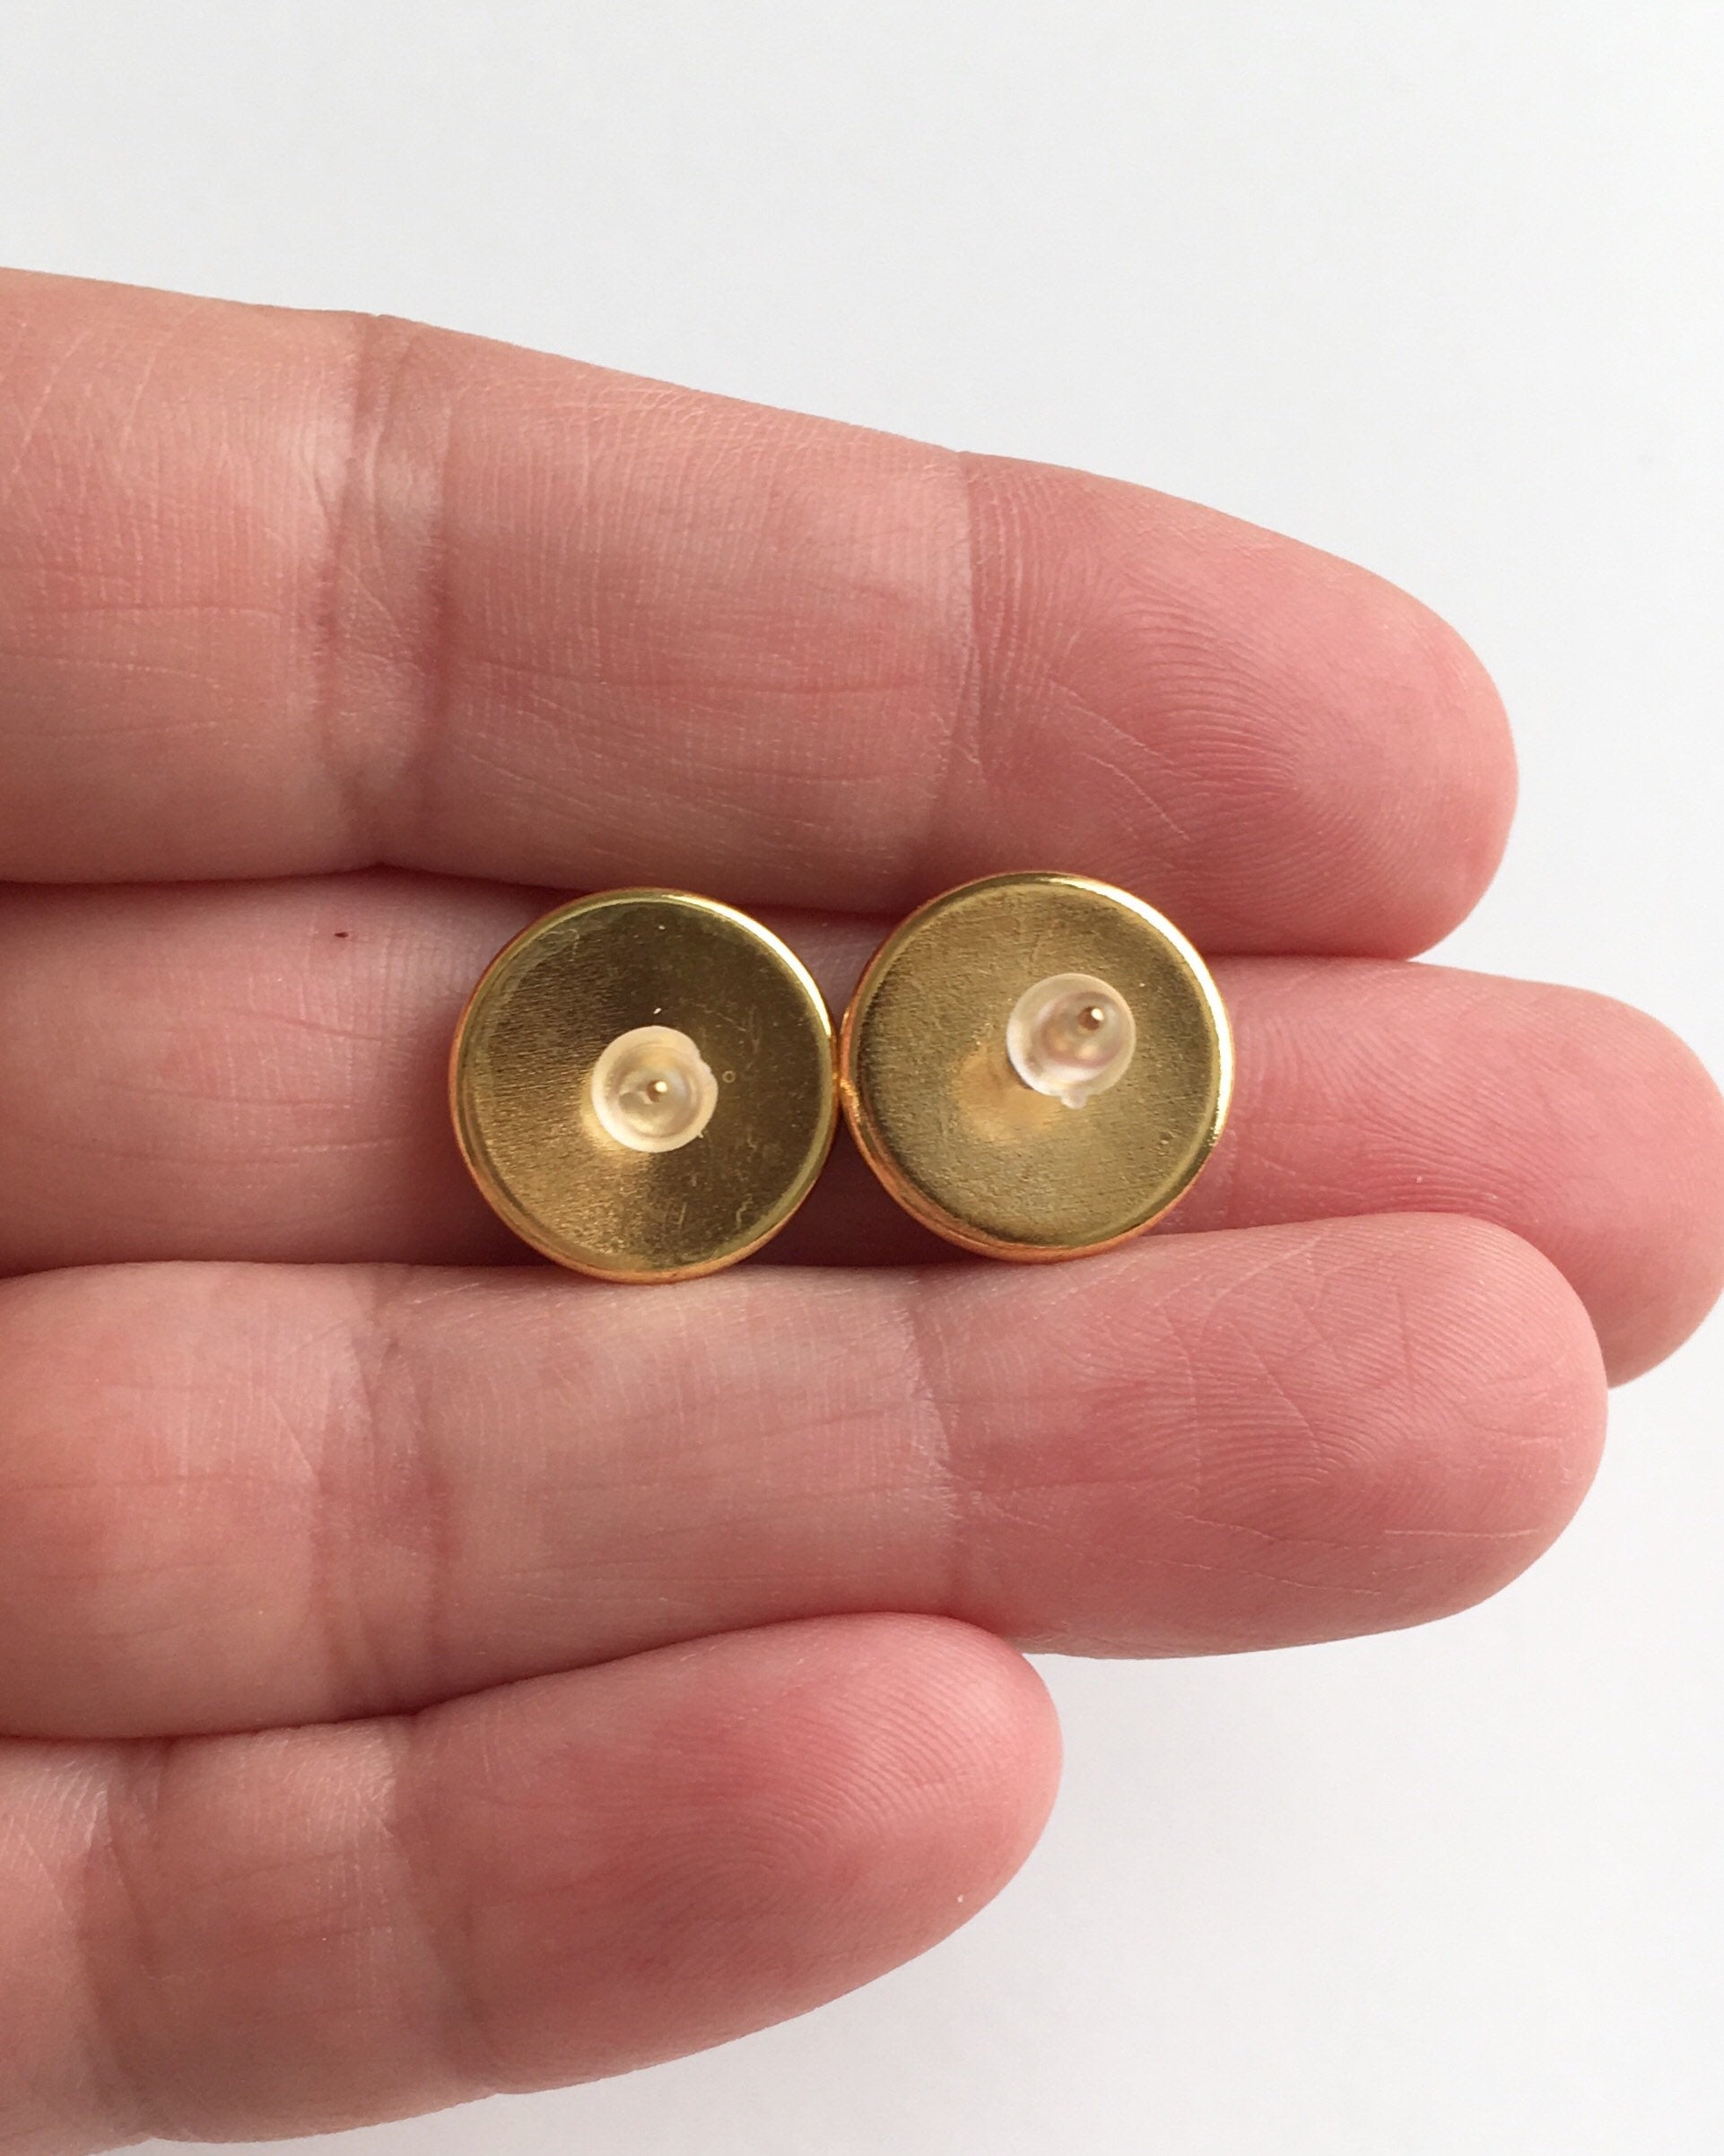 Hand holding gold stud earrings with rubber push backs.